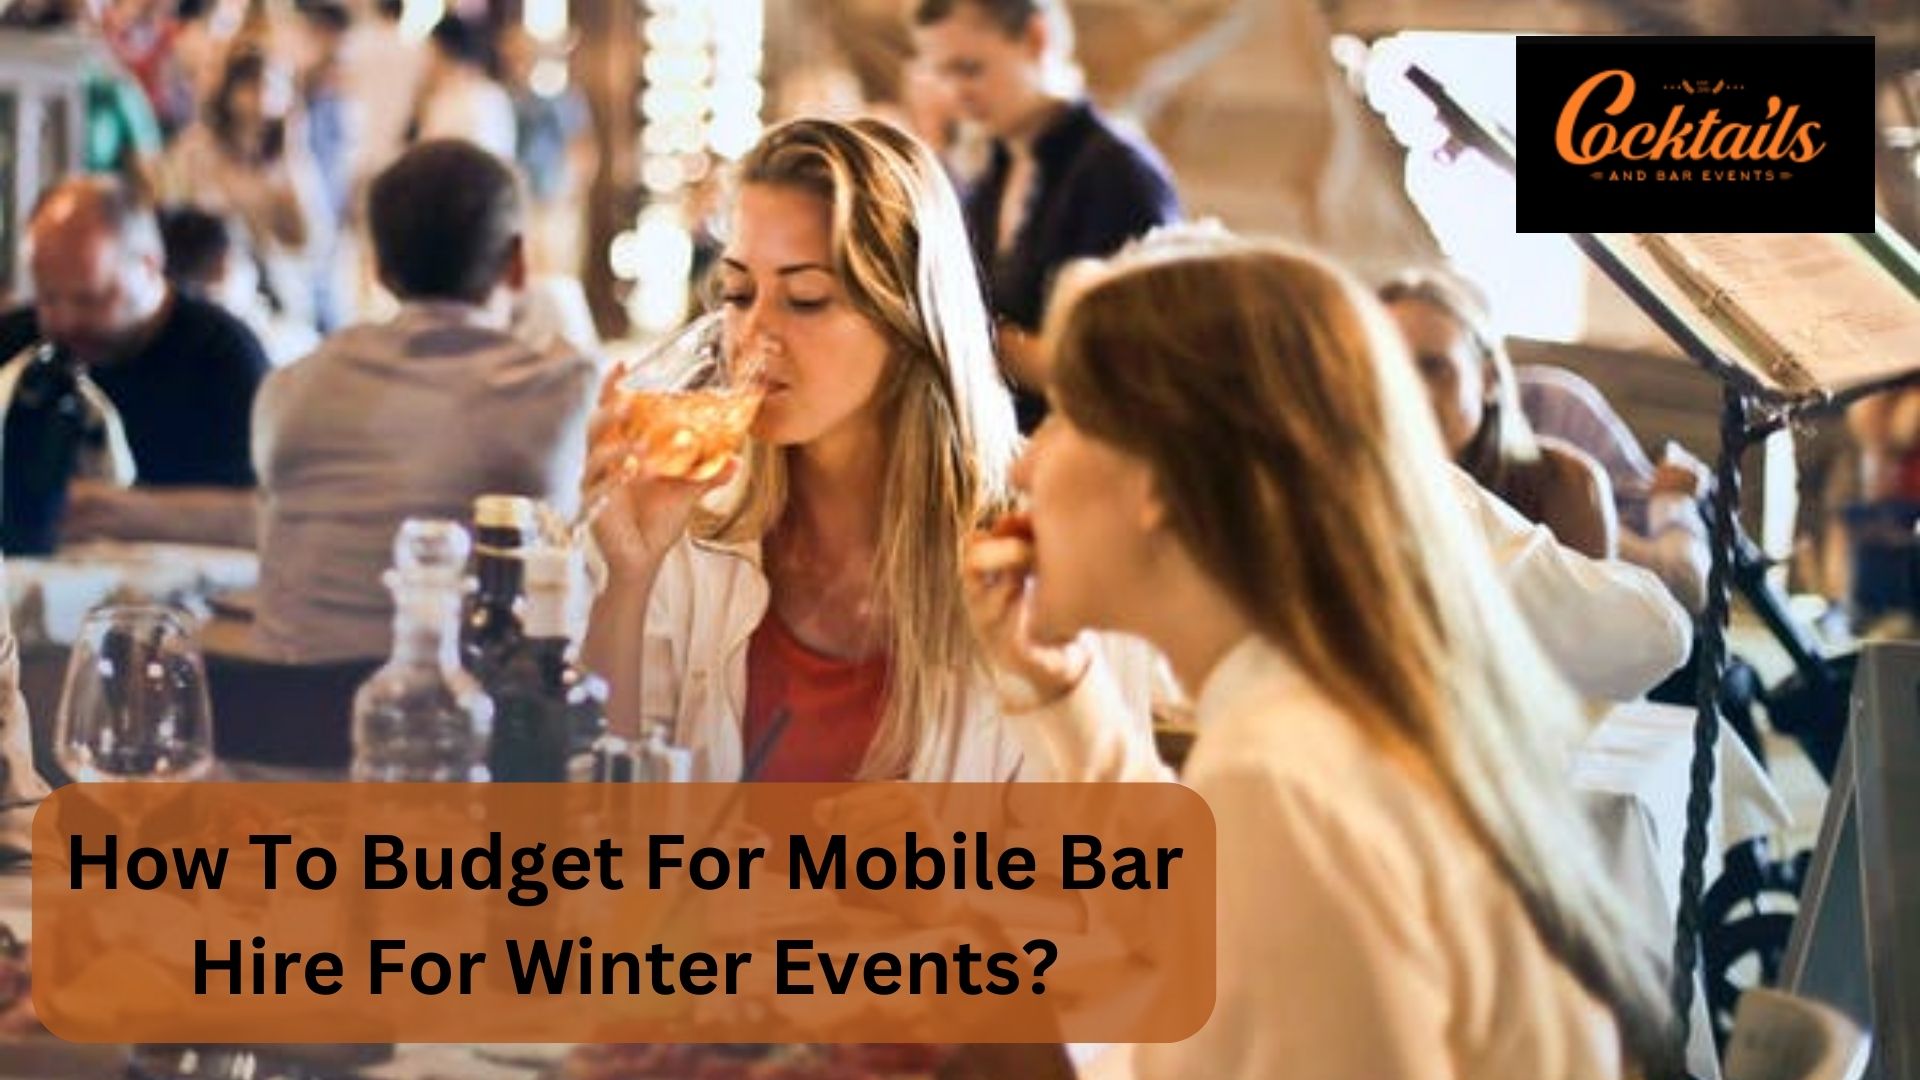 How To Budget For Mobile Bar Hire For Winter Events? -